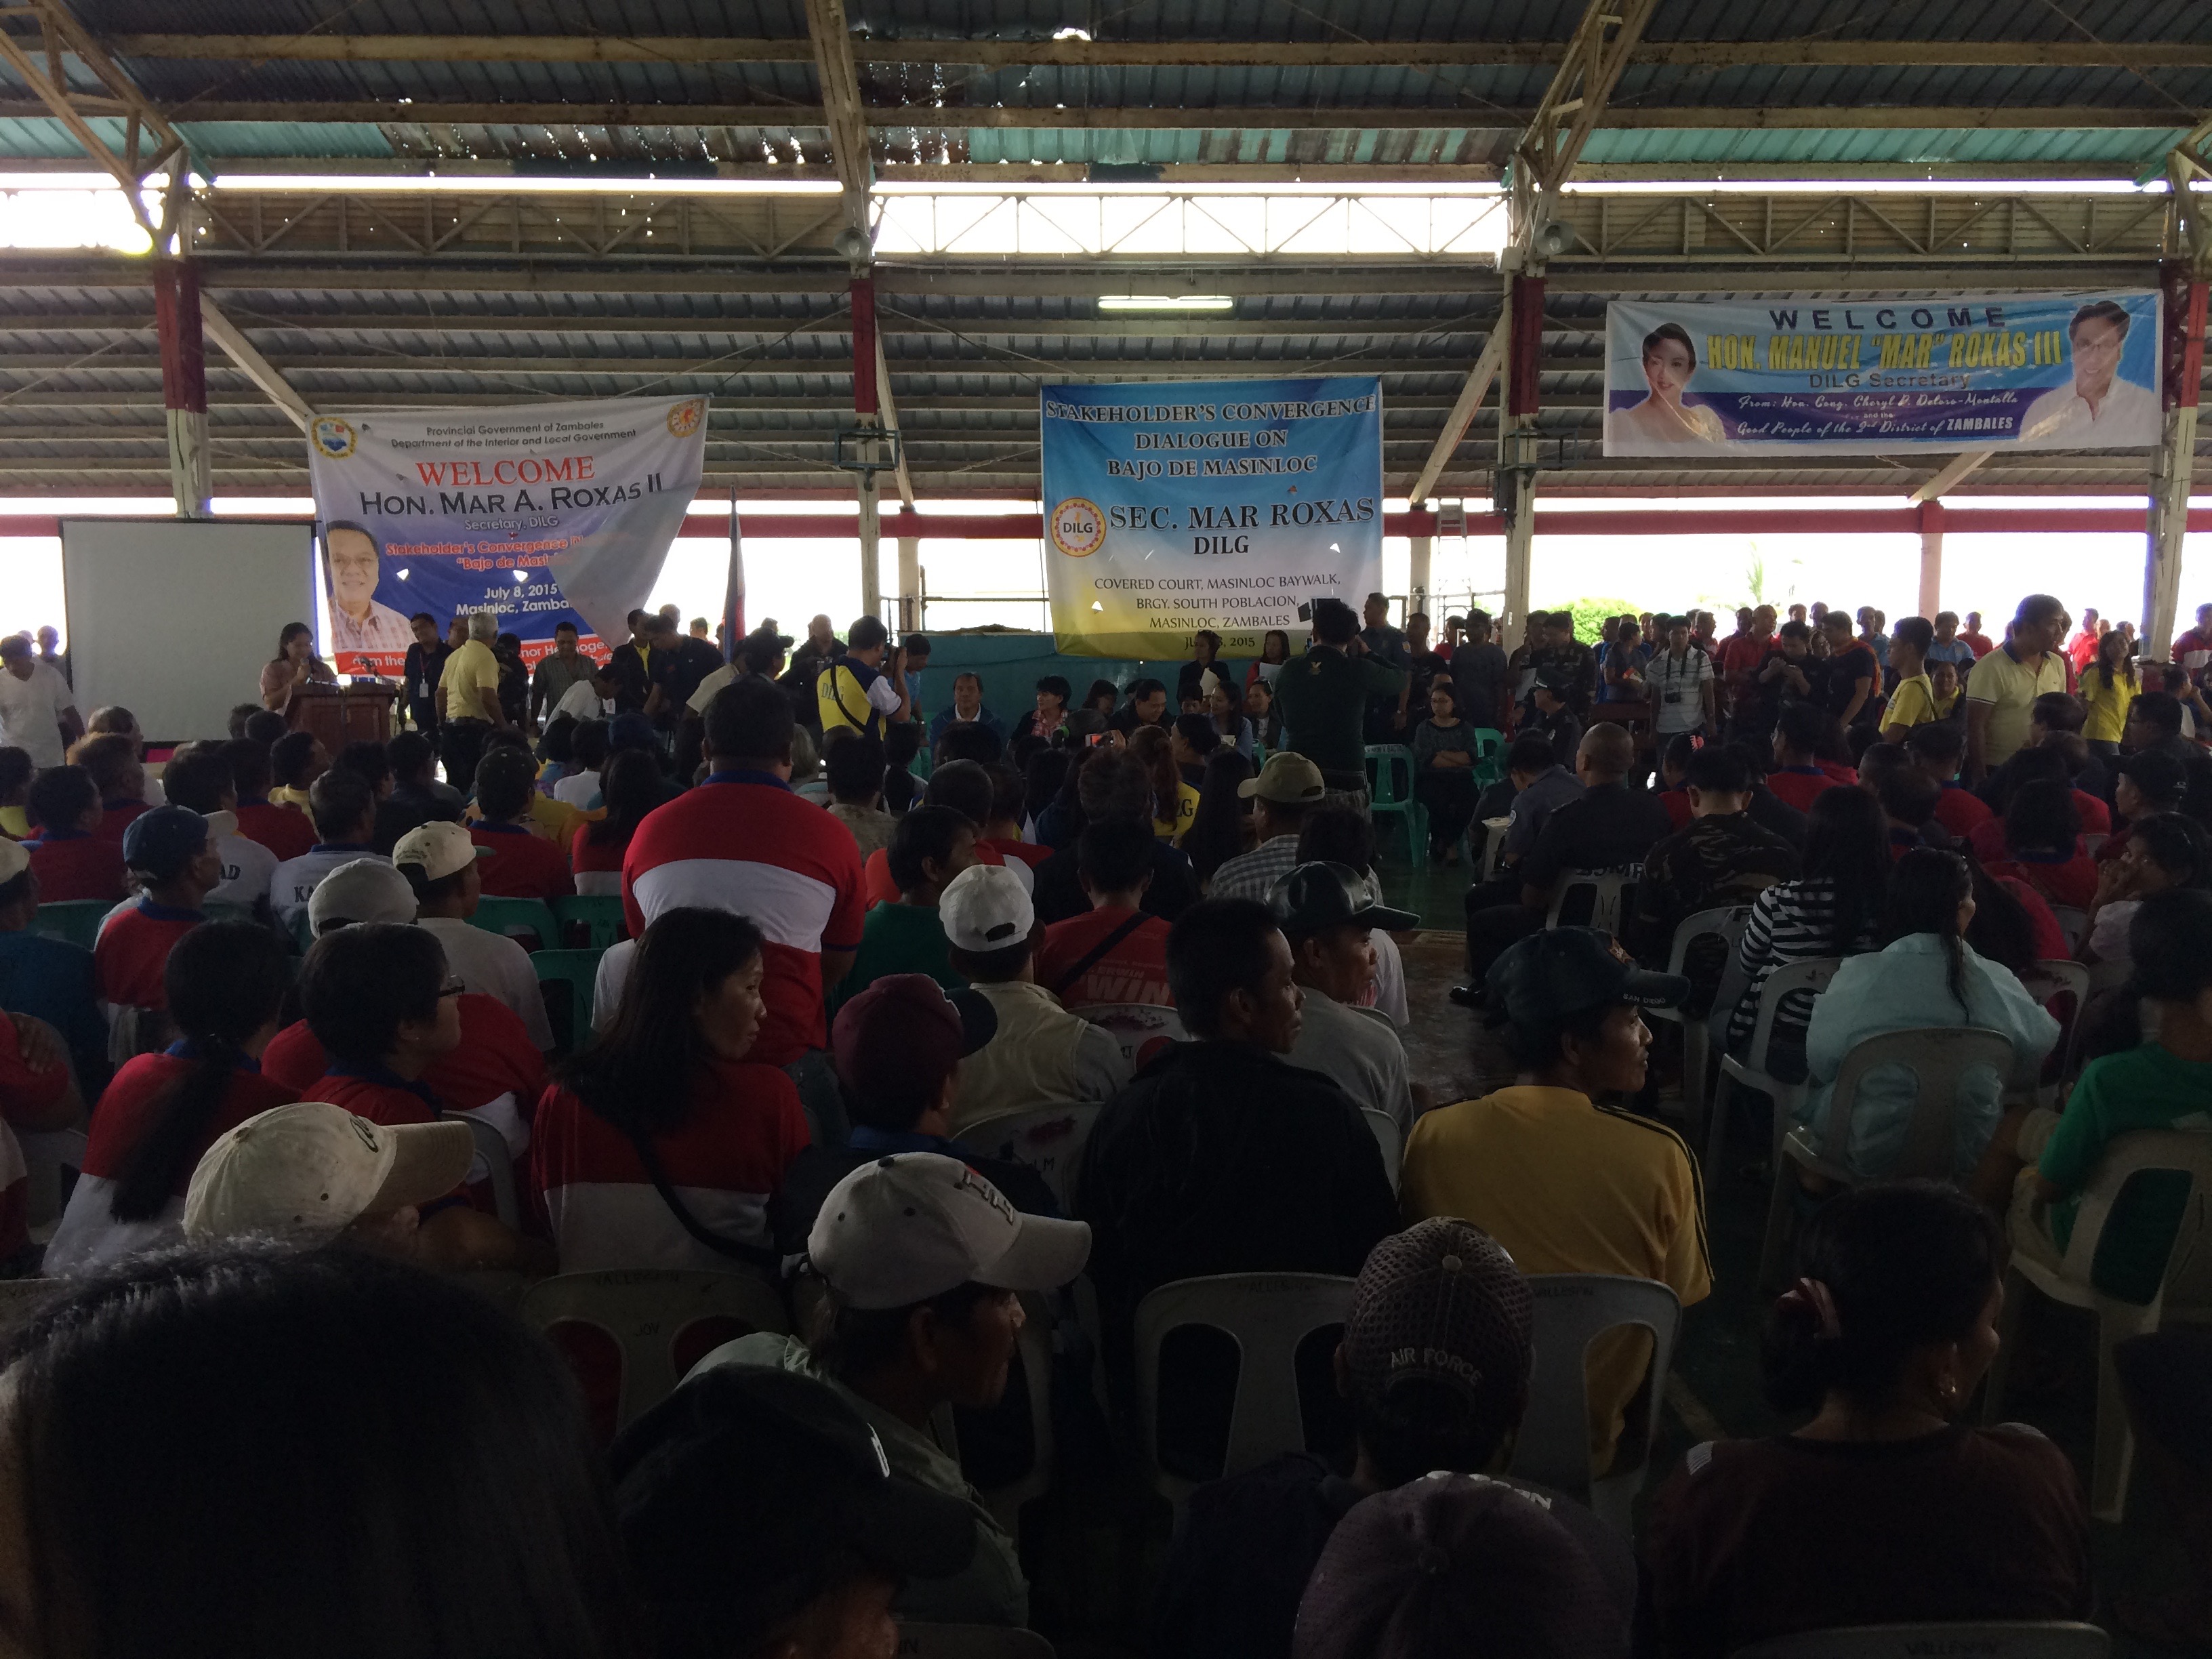 OUR CONCERNS. Fisherfolk gather in Masinloc, Zambales to discuss issues surrounding the West Philippine Sea. Photo by Bea Cupin/Rappler 